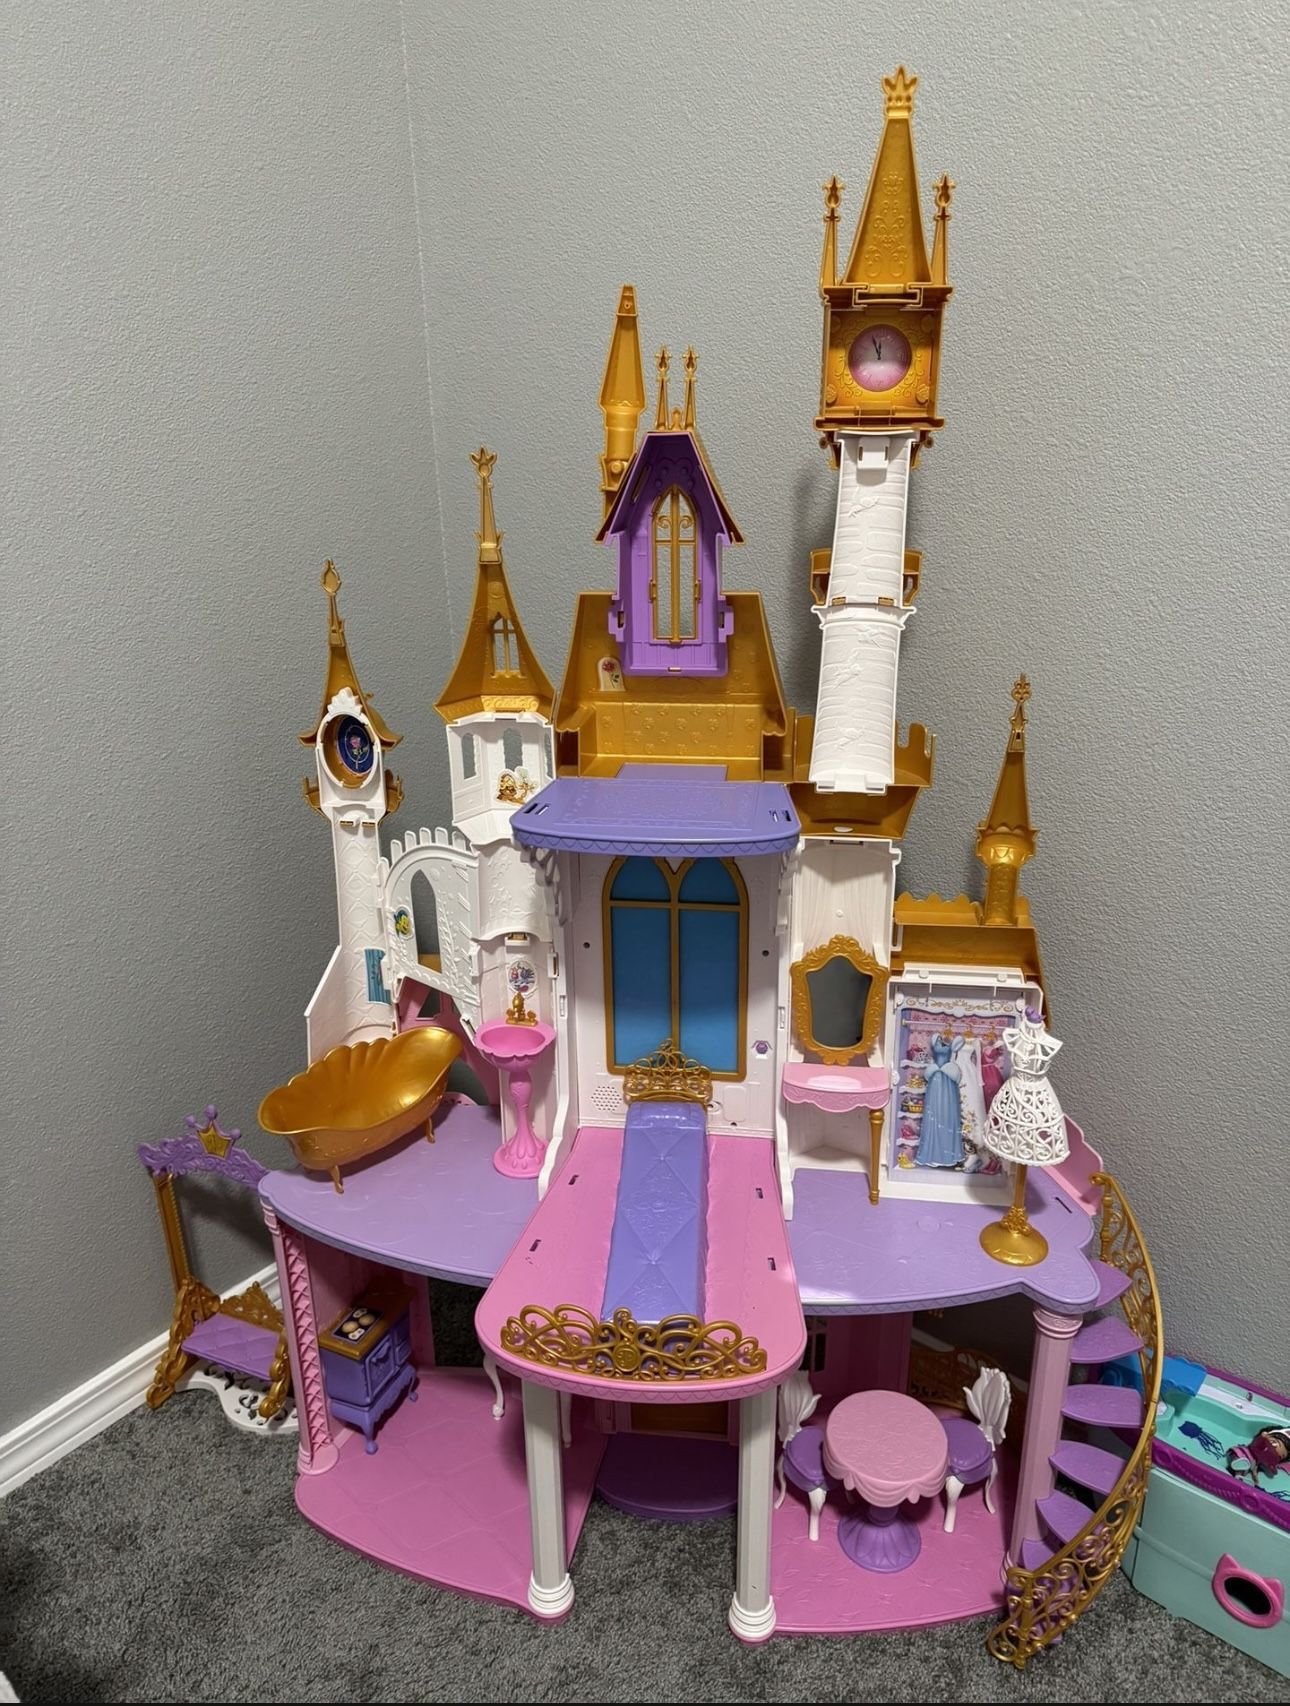 Disney Princess Ultimate Celebration Castle, 4 Feet Tall Doll House with Furniture and Accessories, Musical Fireworks Light Show